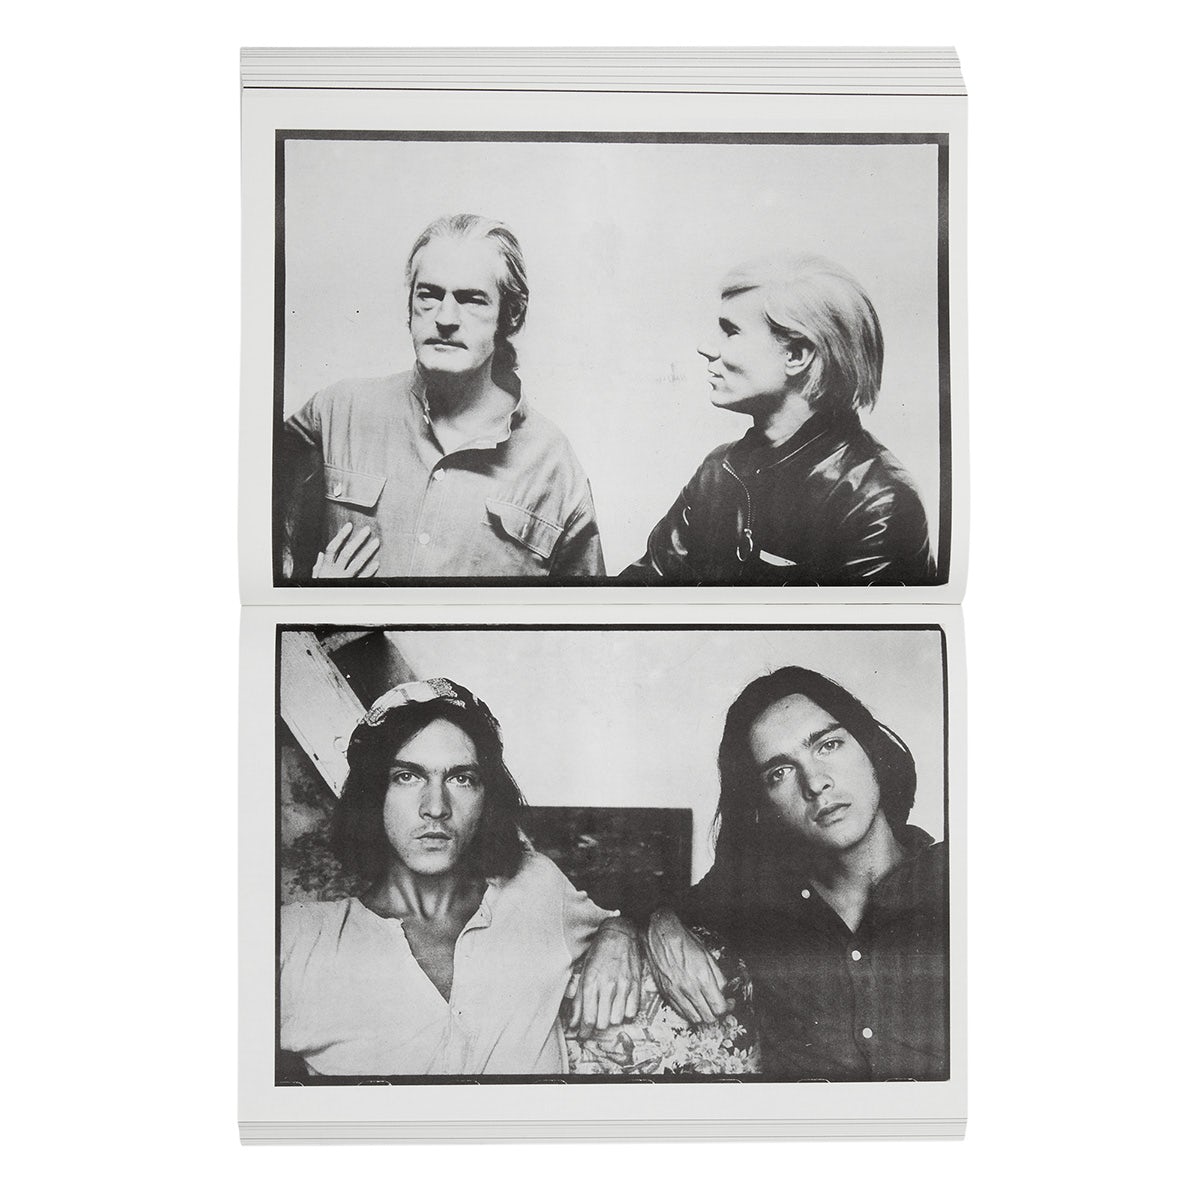 Spread from Newspaper published by Primary Information featuring two photographs of people including Andy Warhol